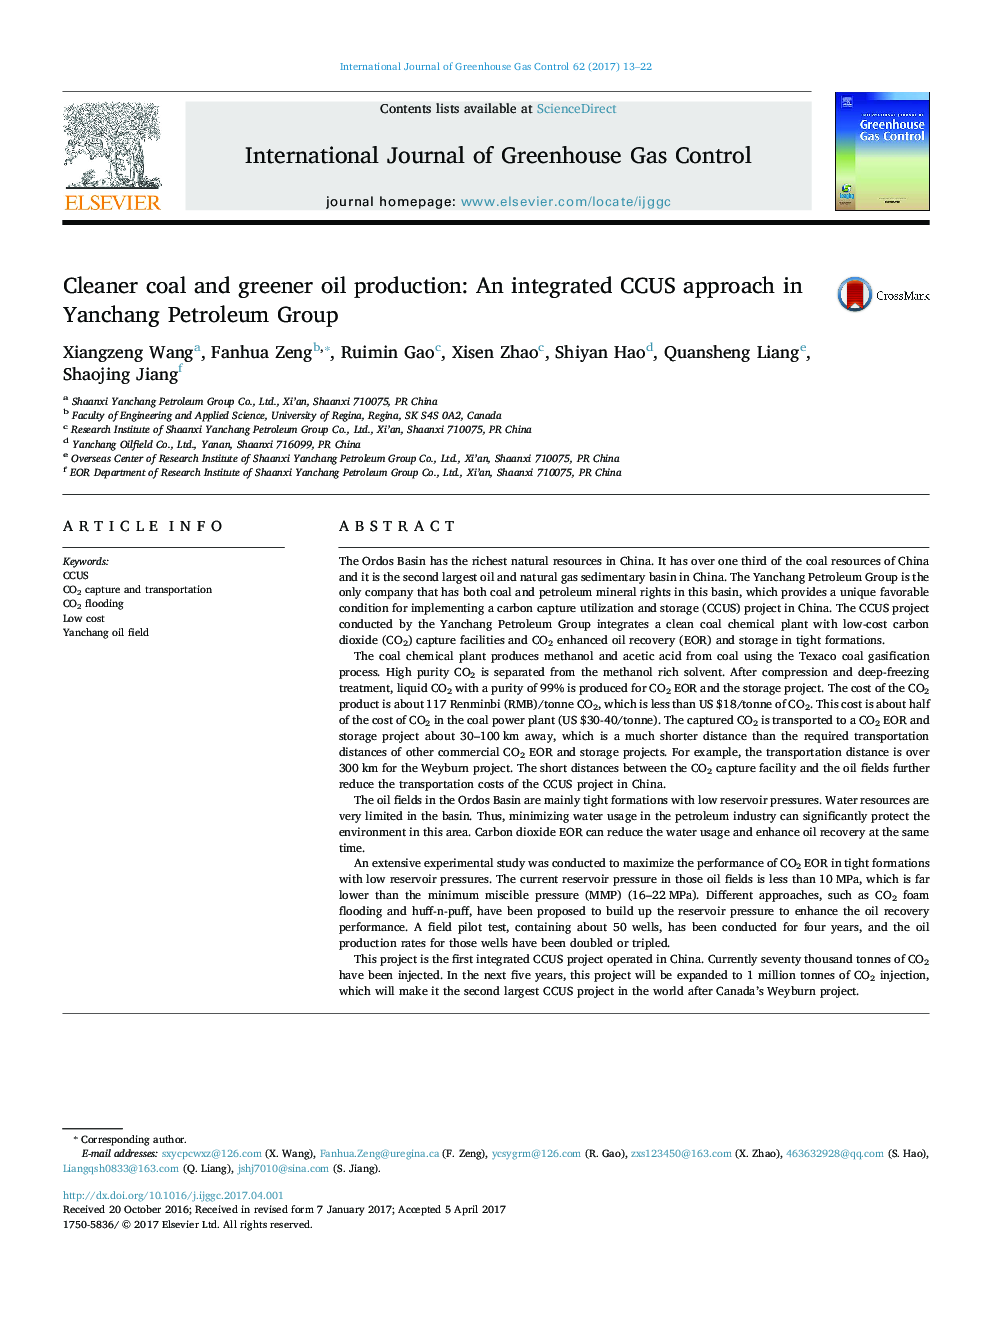 Cleaner coal and greener oil production: An integrated CCUS approach in Yanchang Petroleum Group